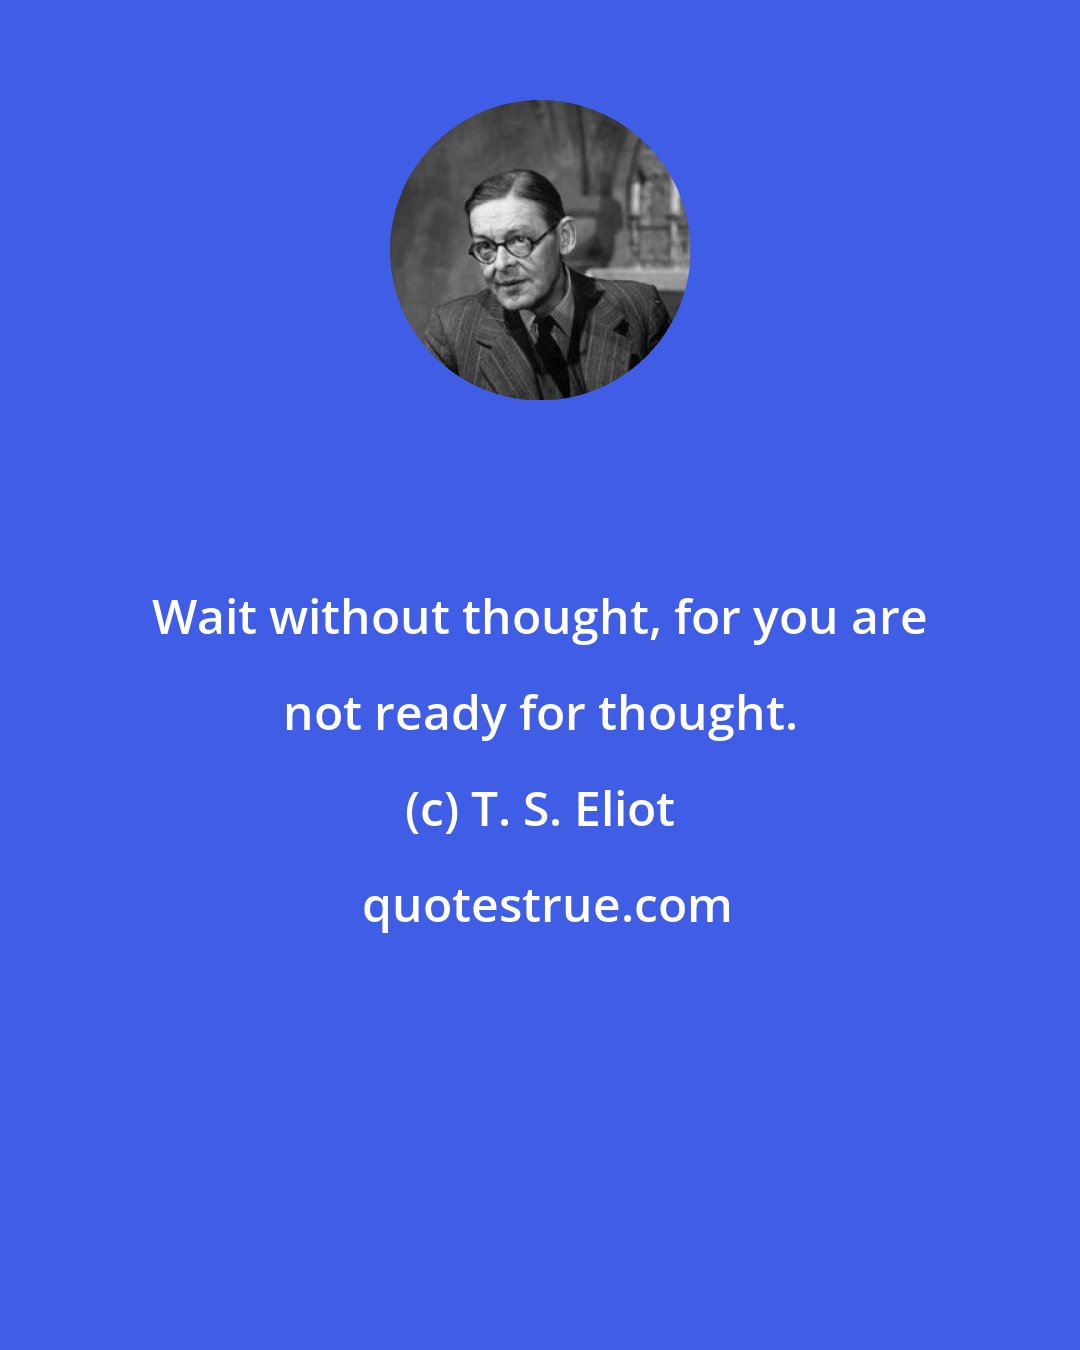 T. S. Eliot: Wait without thought, for you are not ready for thought.